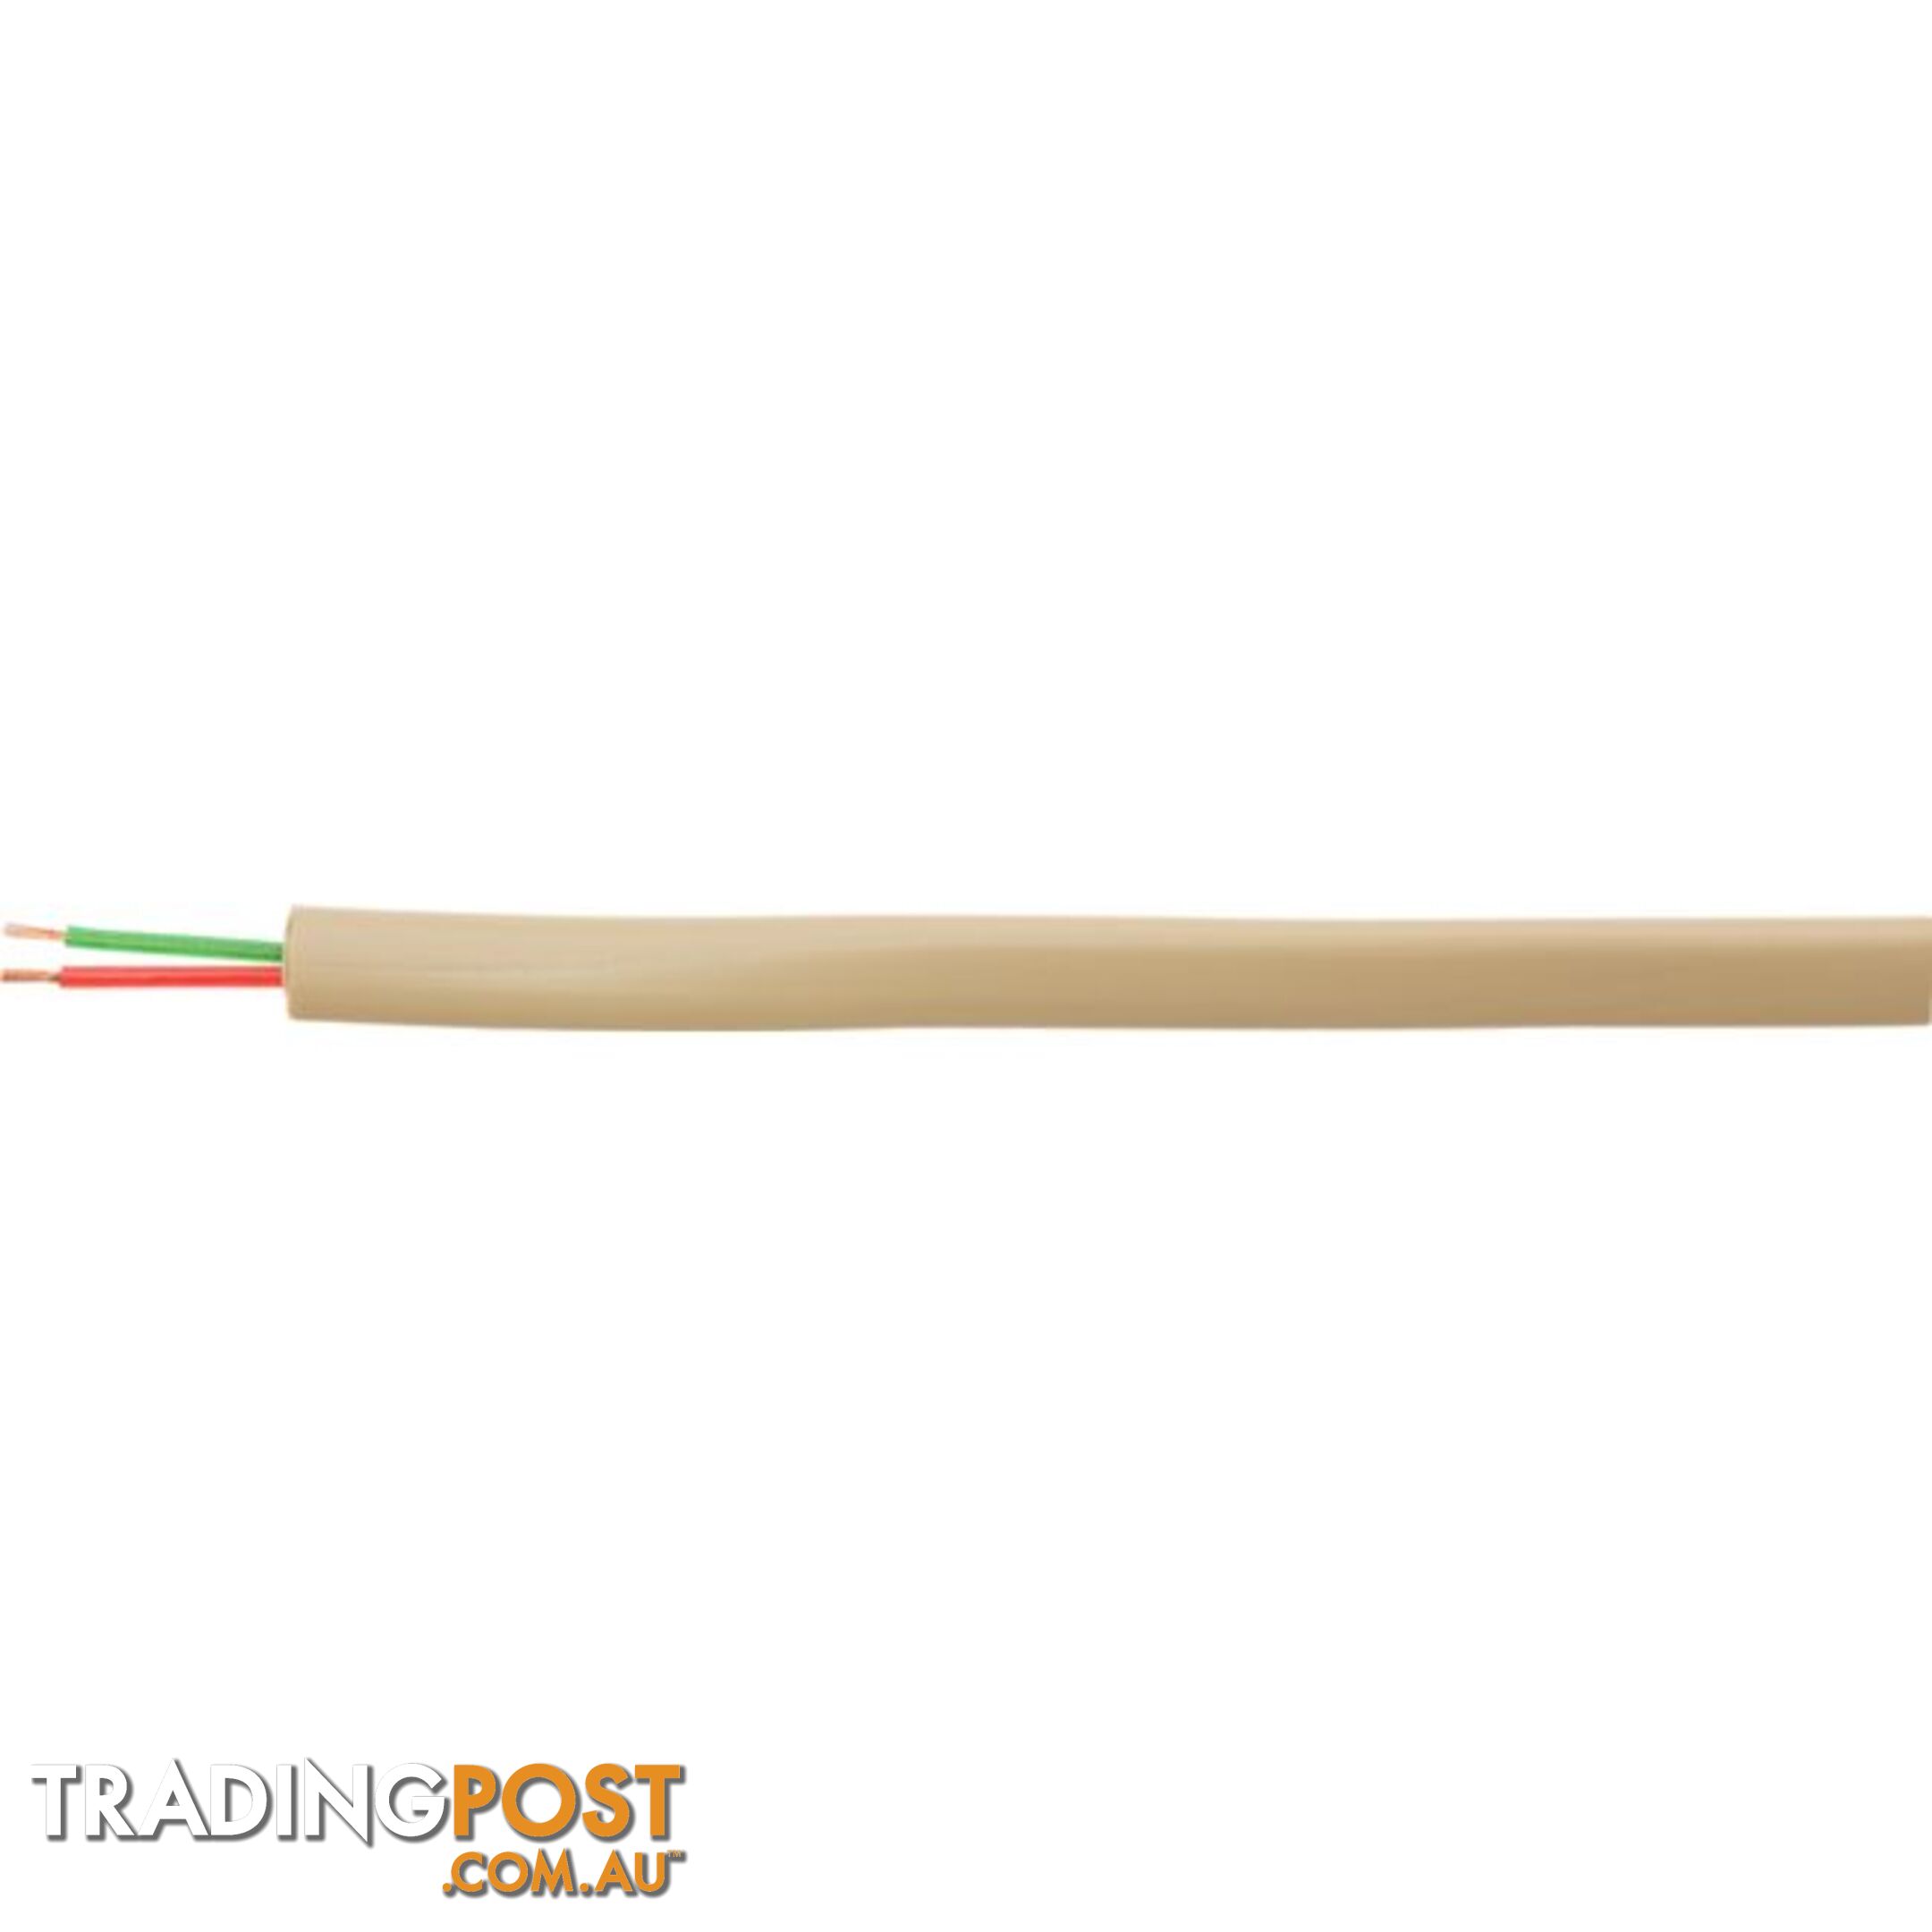 T2-1M MODULAR TELEPHONE CABLE - 1M 2 CORE FLAT CABLE - PER METRE